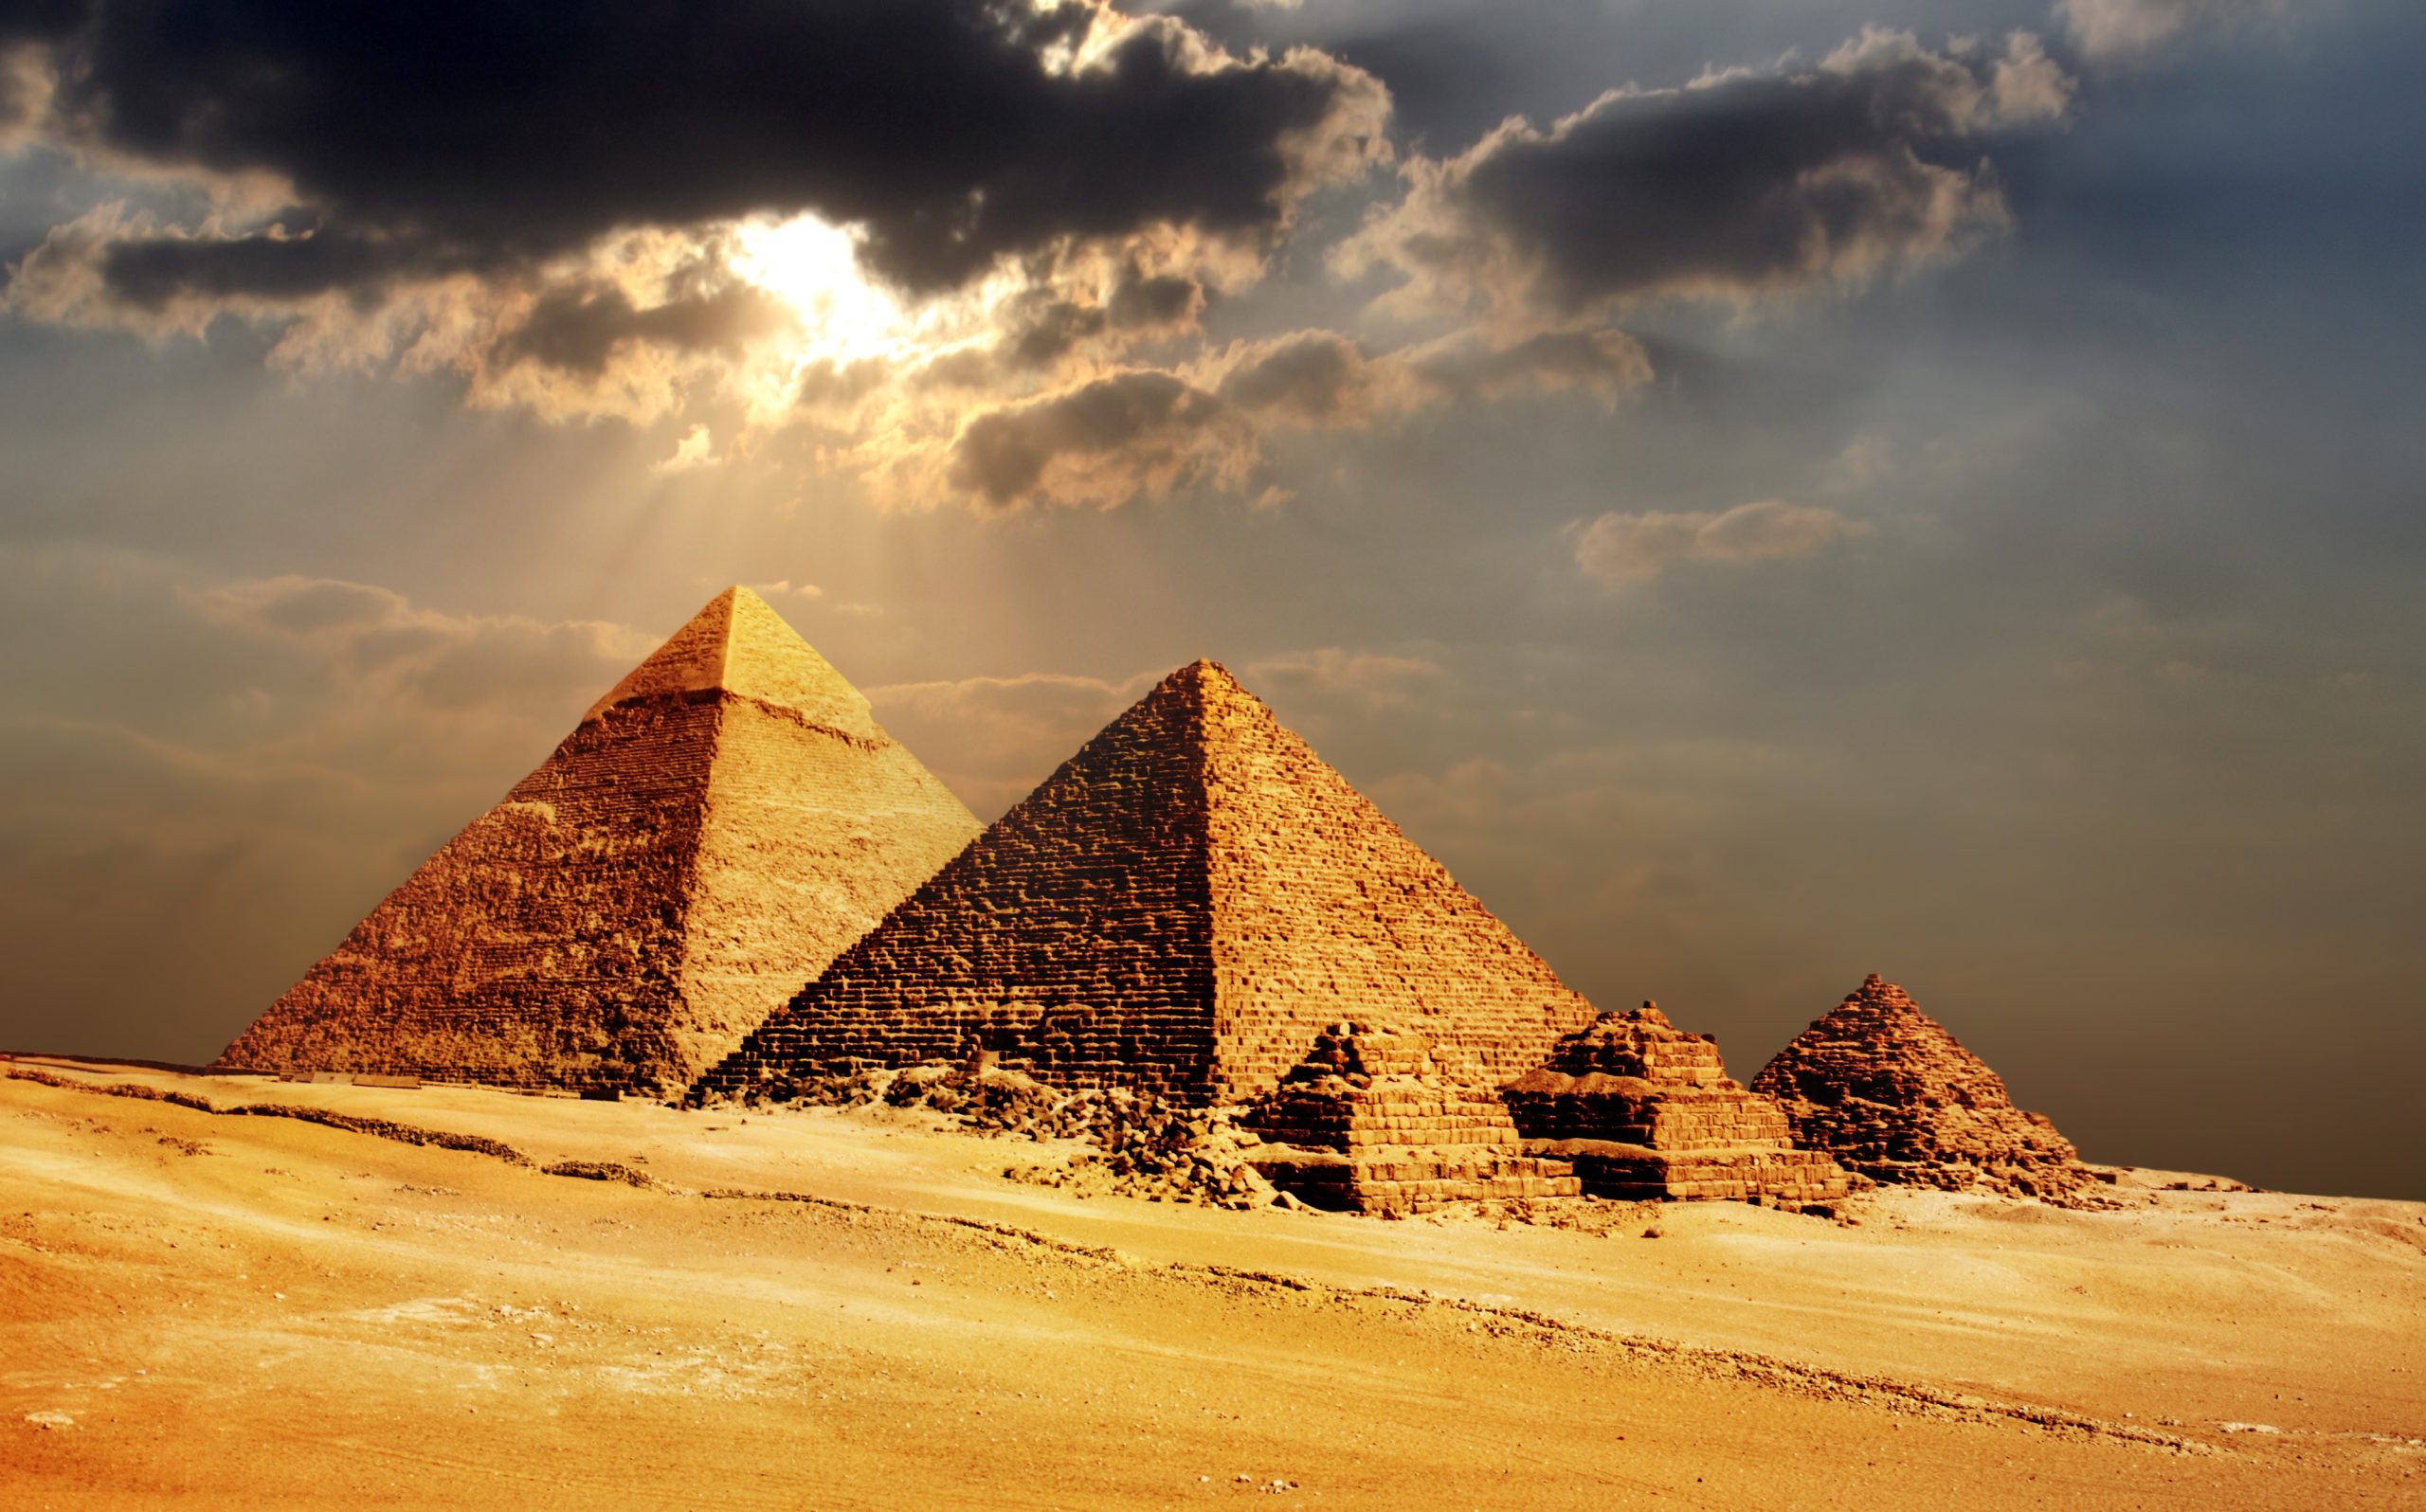 Beyond the Pharaohs: 10 Intriguing Facts About the Pyramids of Giza